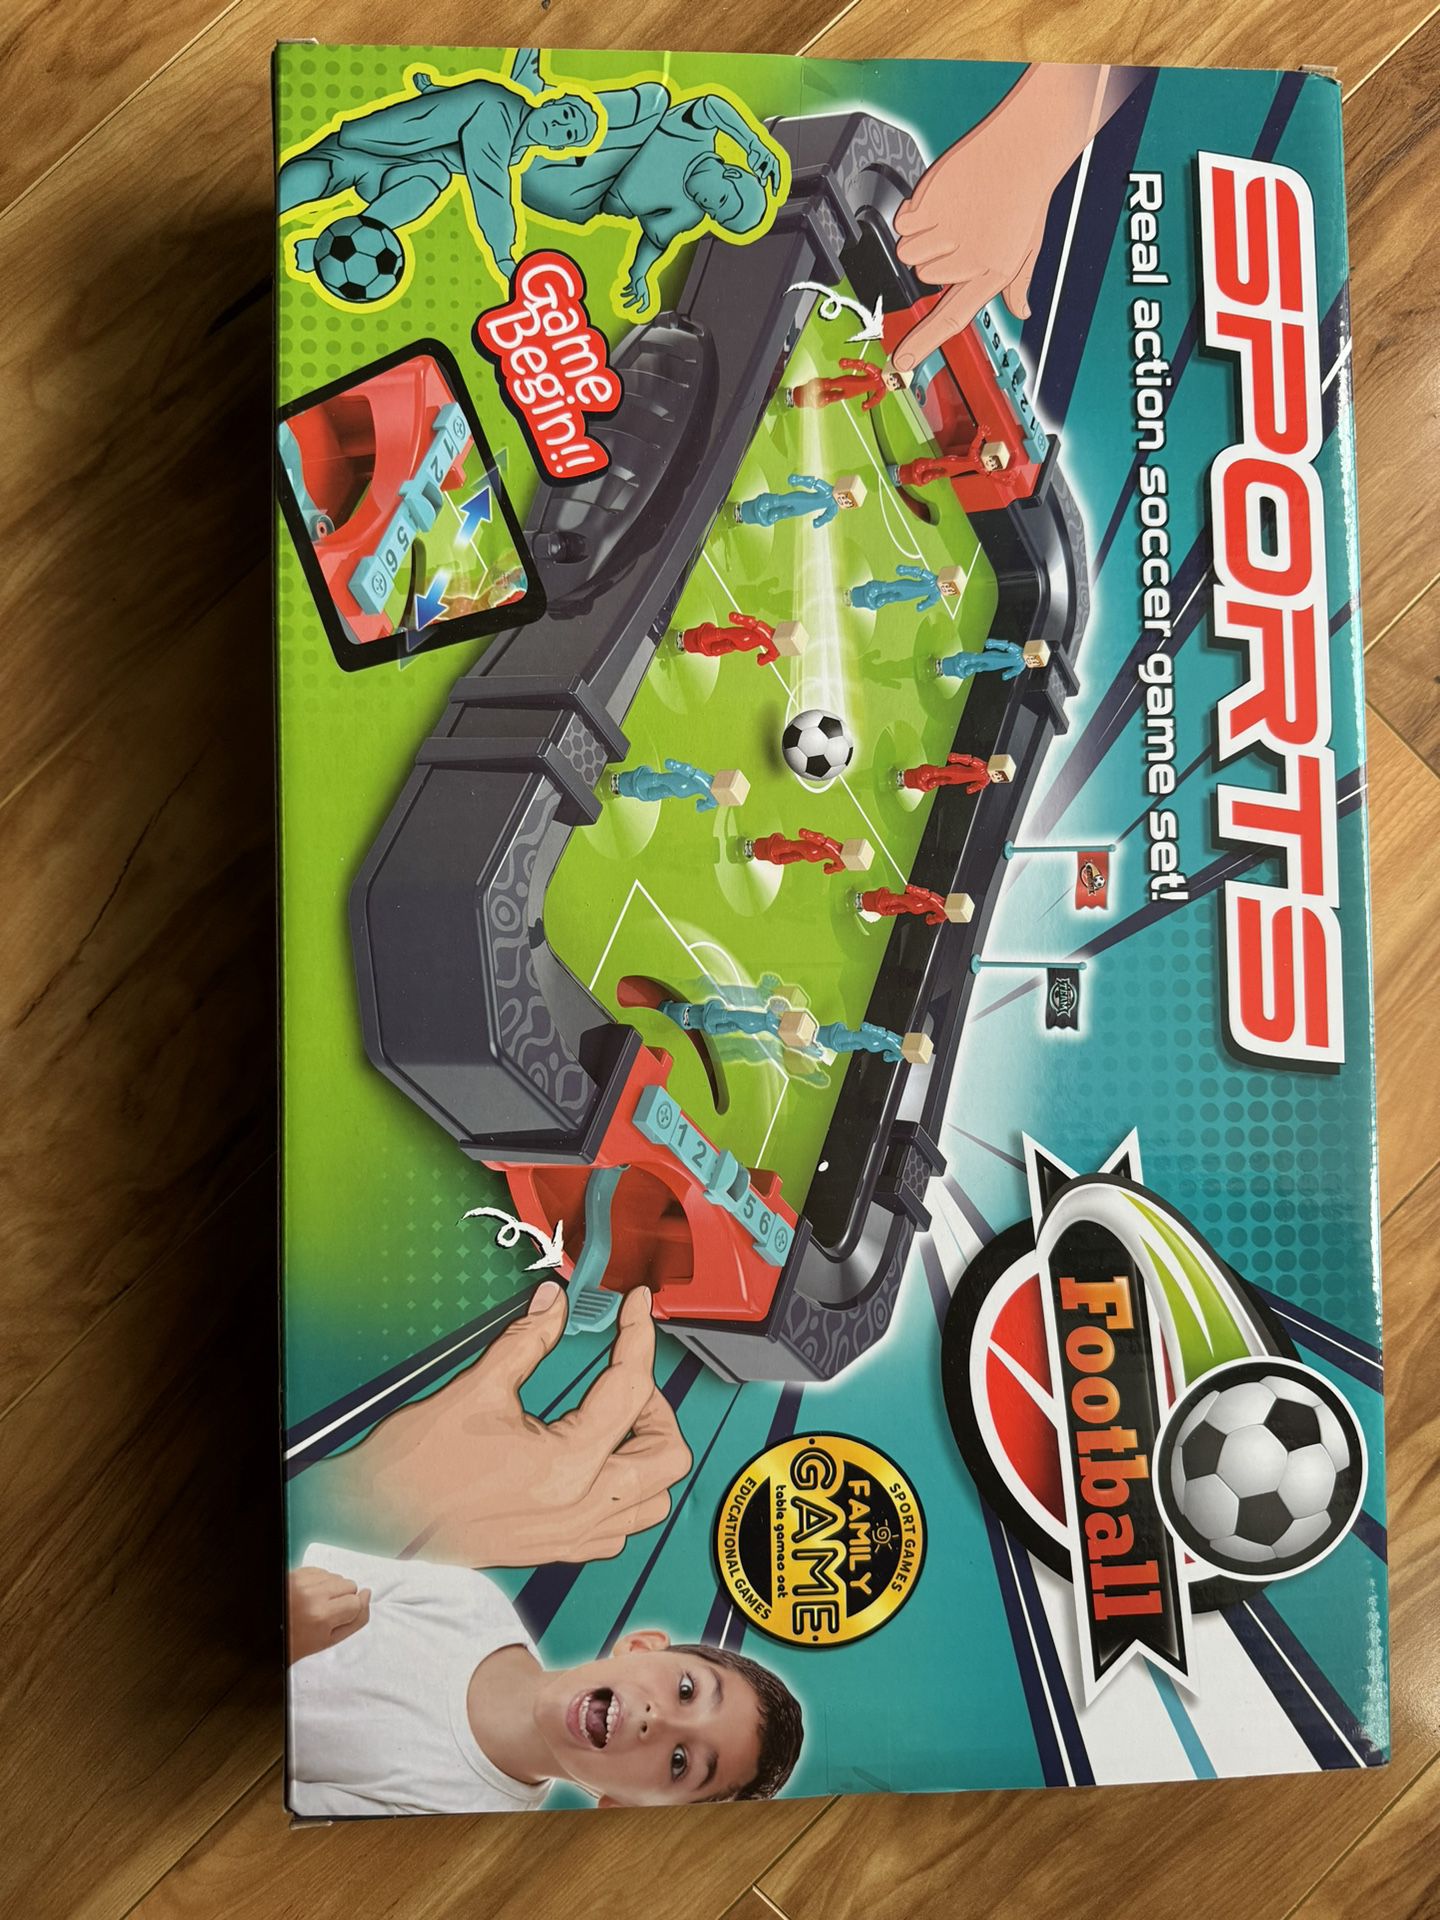 Brand Nee Unopened Sports Real Action Soccer Game Set